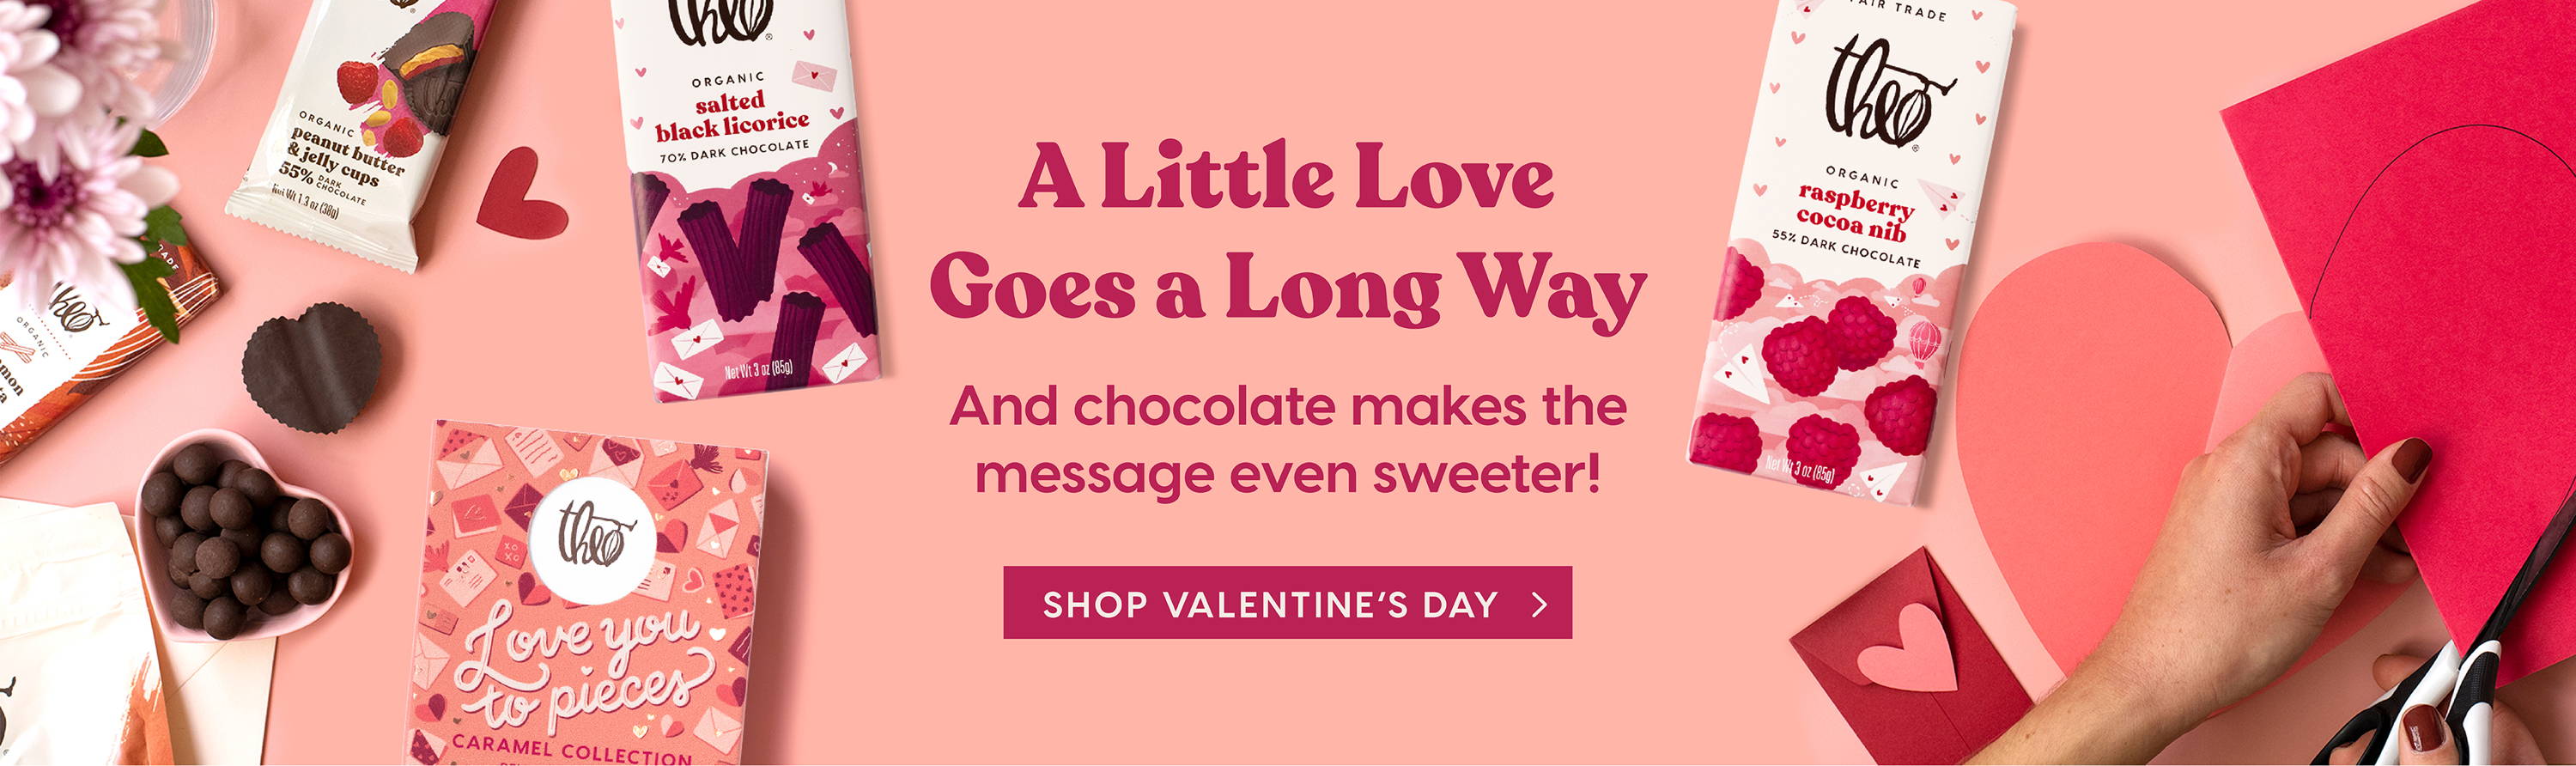 A Little Love Goes a Long Way. Shop Valentine's Day